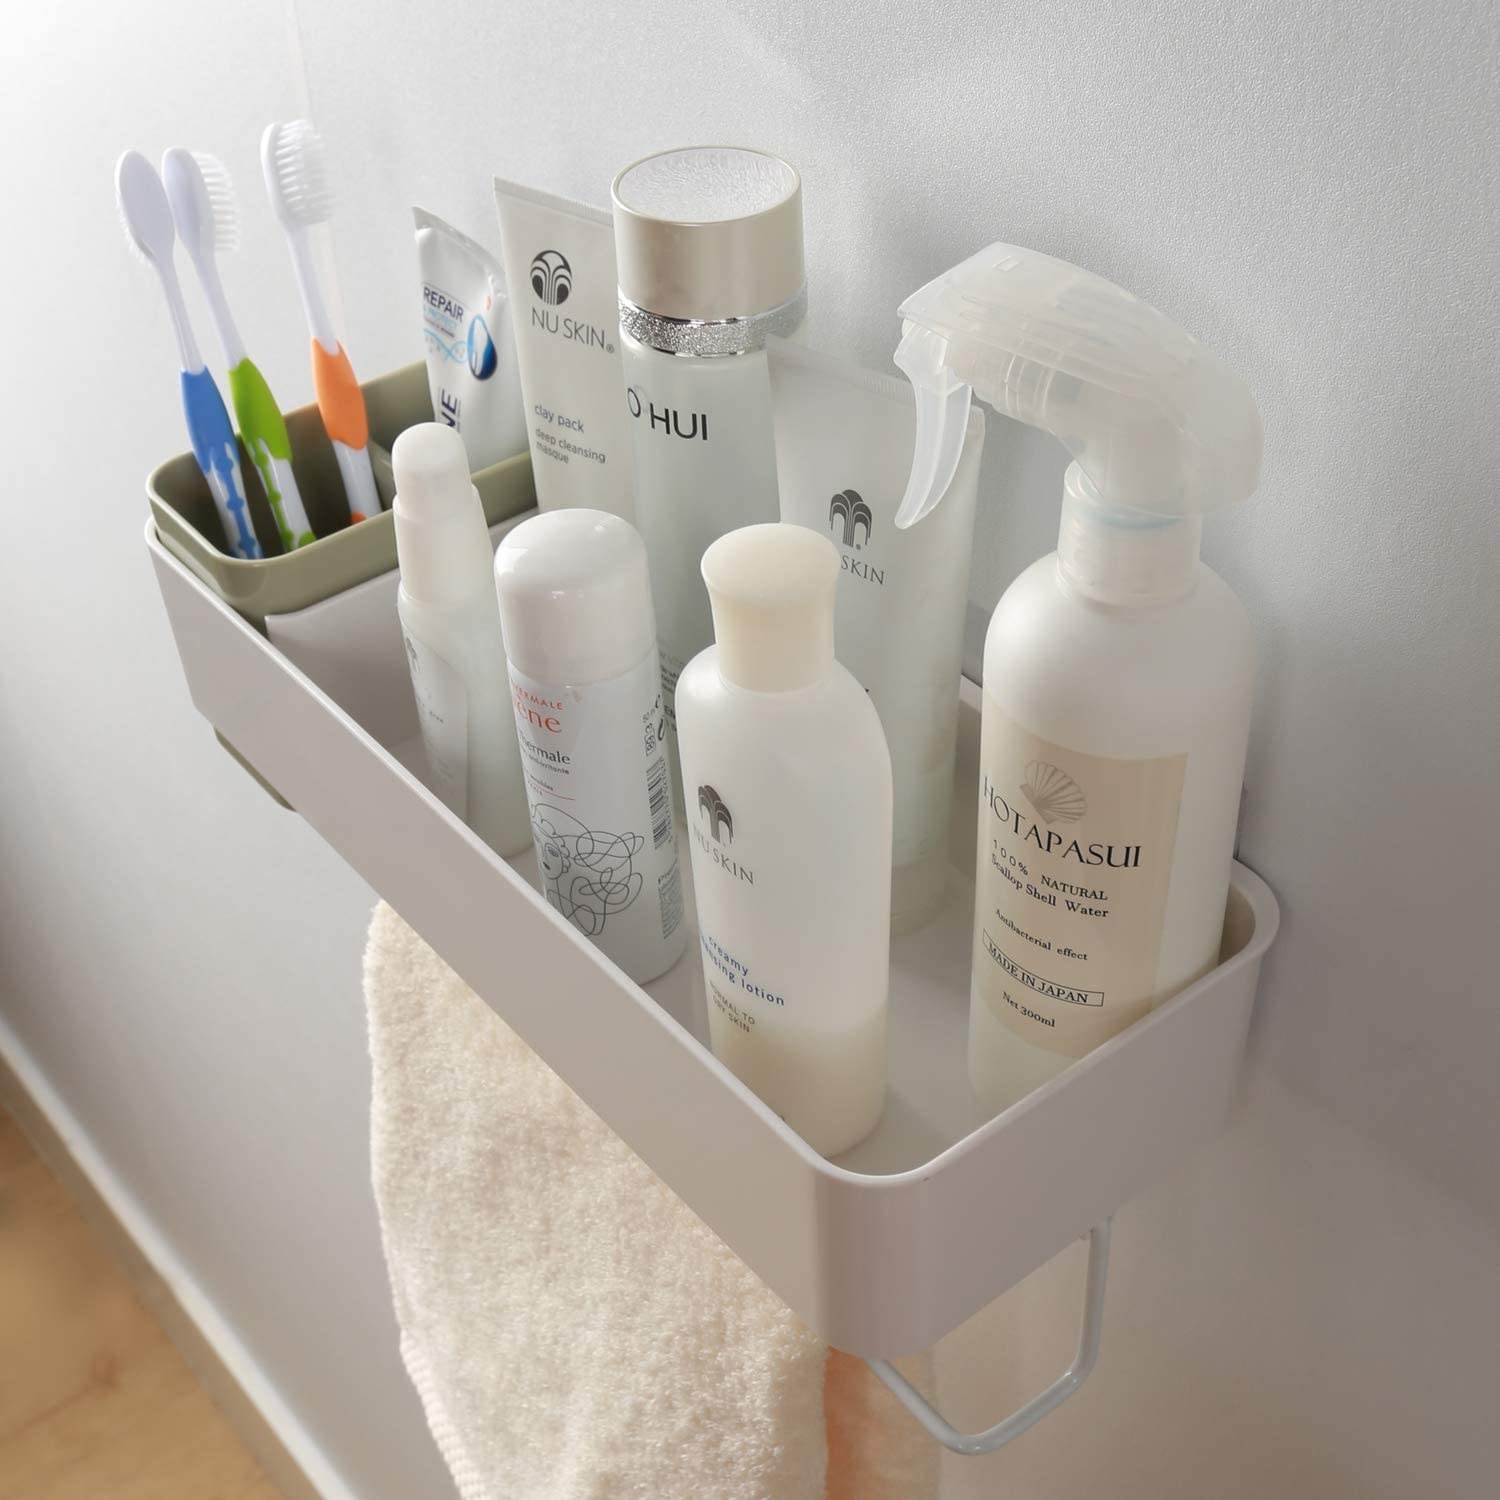 A wall mounted shelf with bathroom products, toothbrushes, and a towel hanging off it